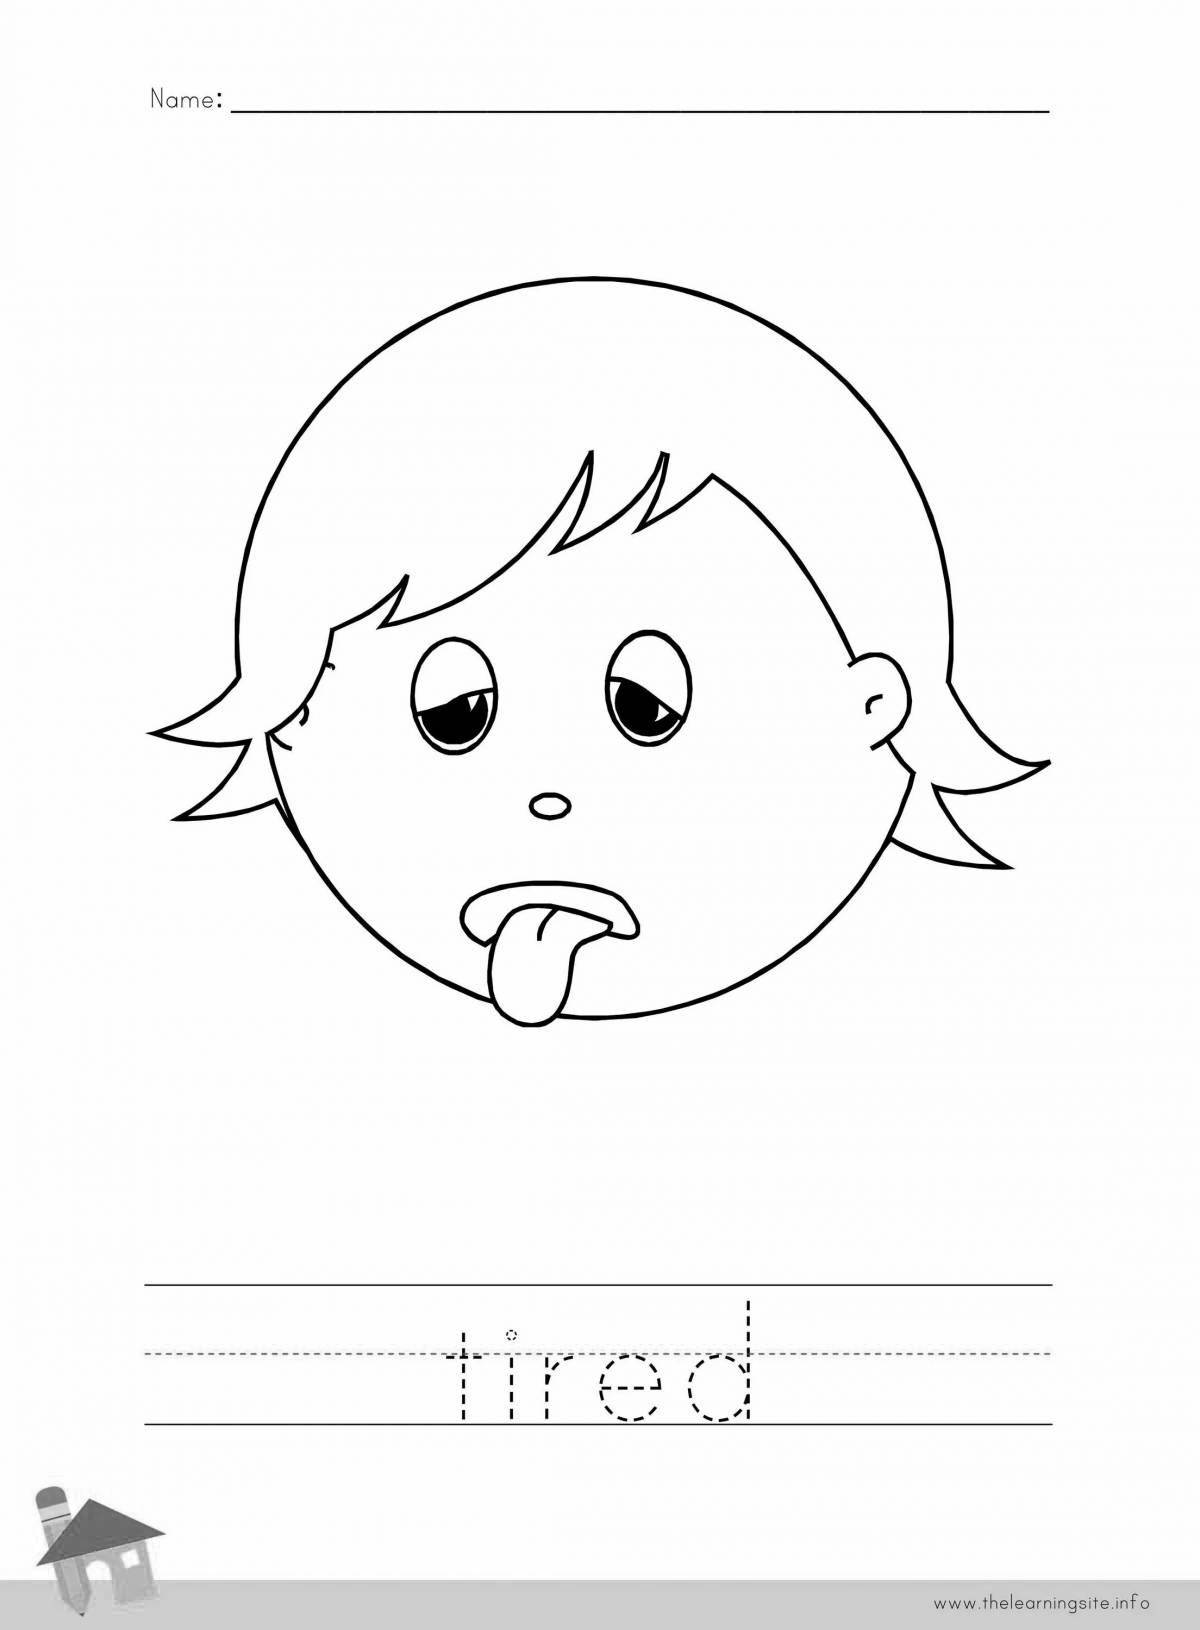 Loving emotion coloring pages for kids